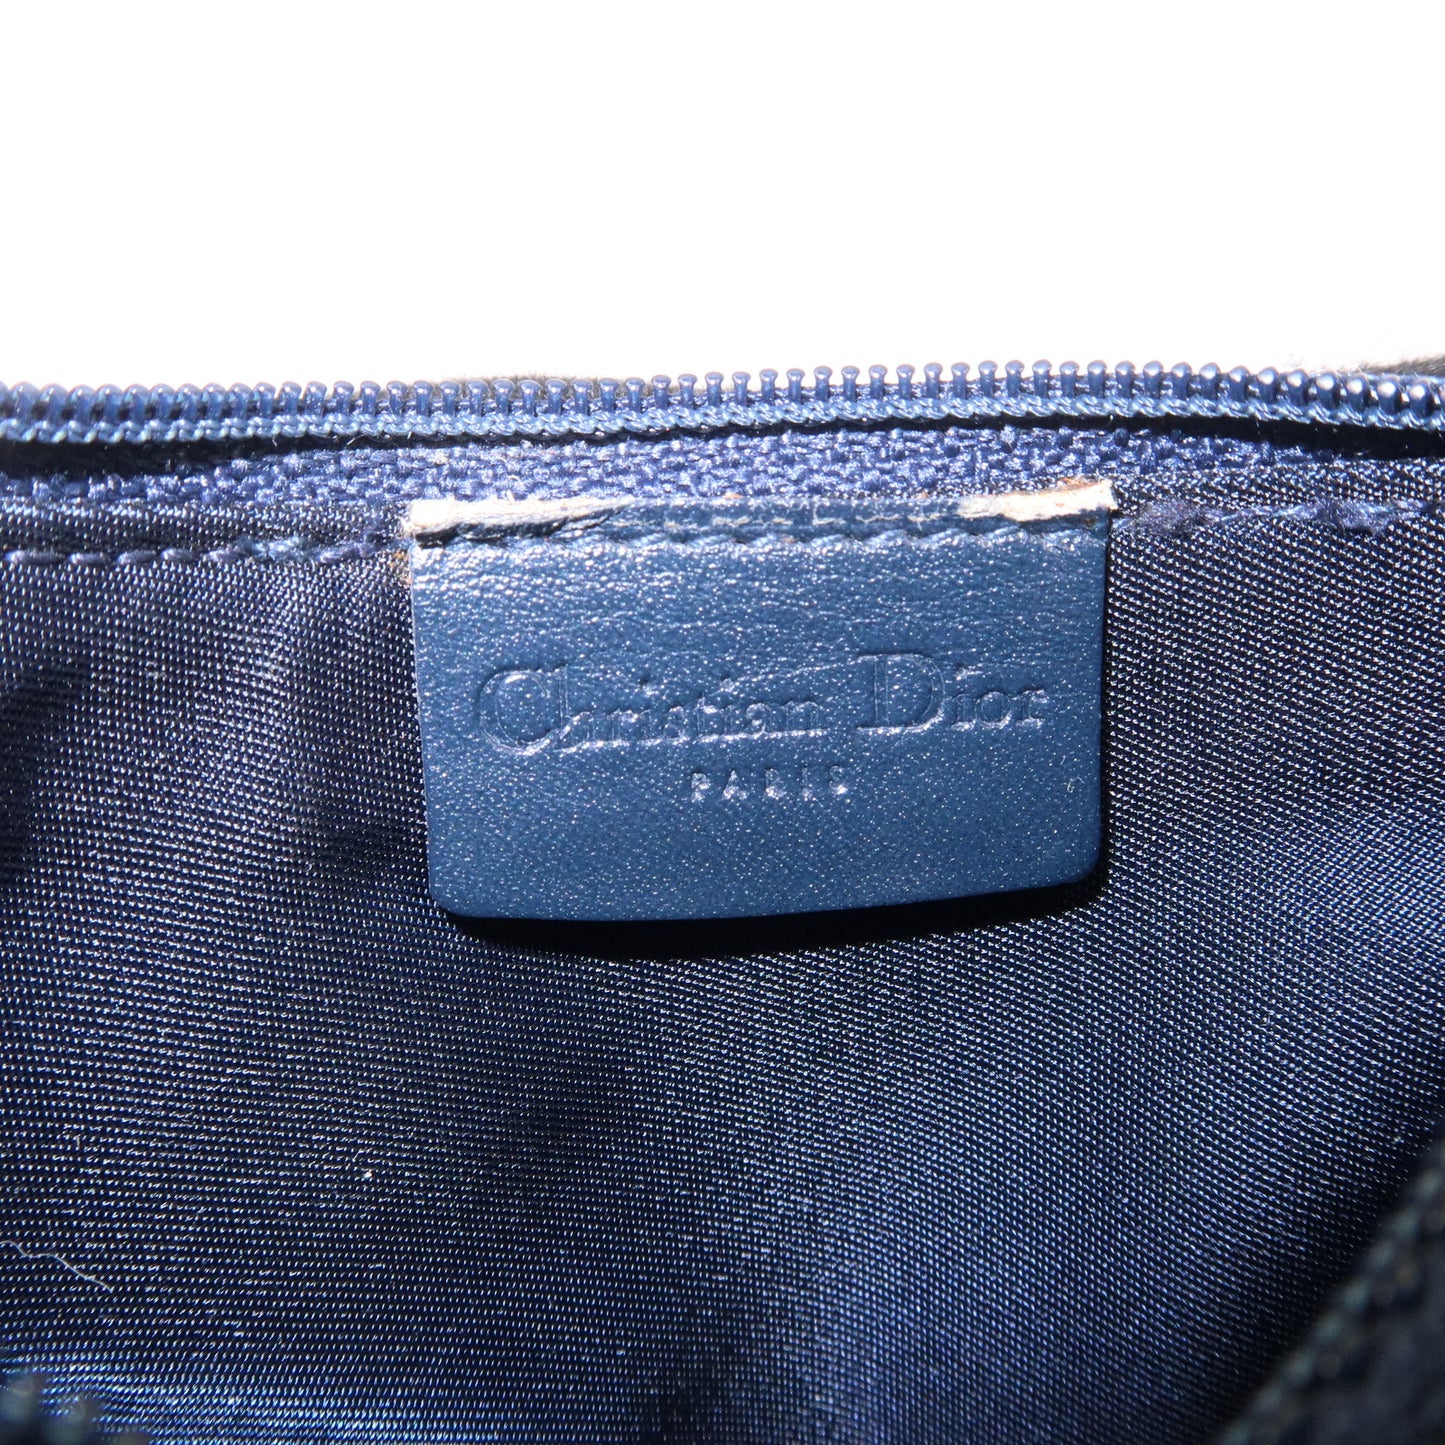 Christian Dior Trotter Canvas Leather Saddle Coin Case Navy